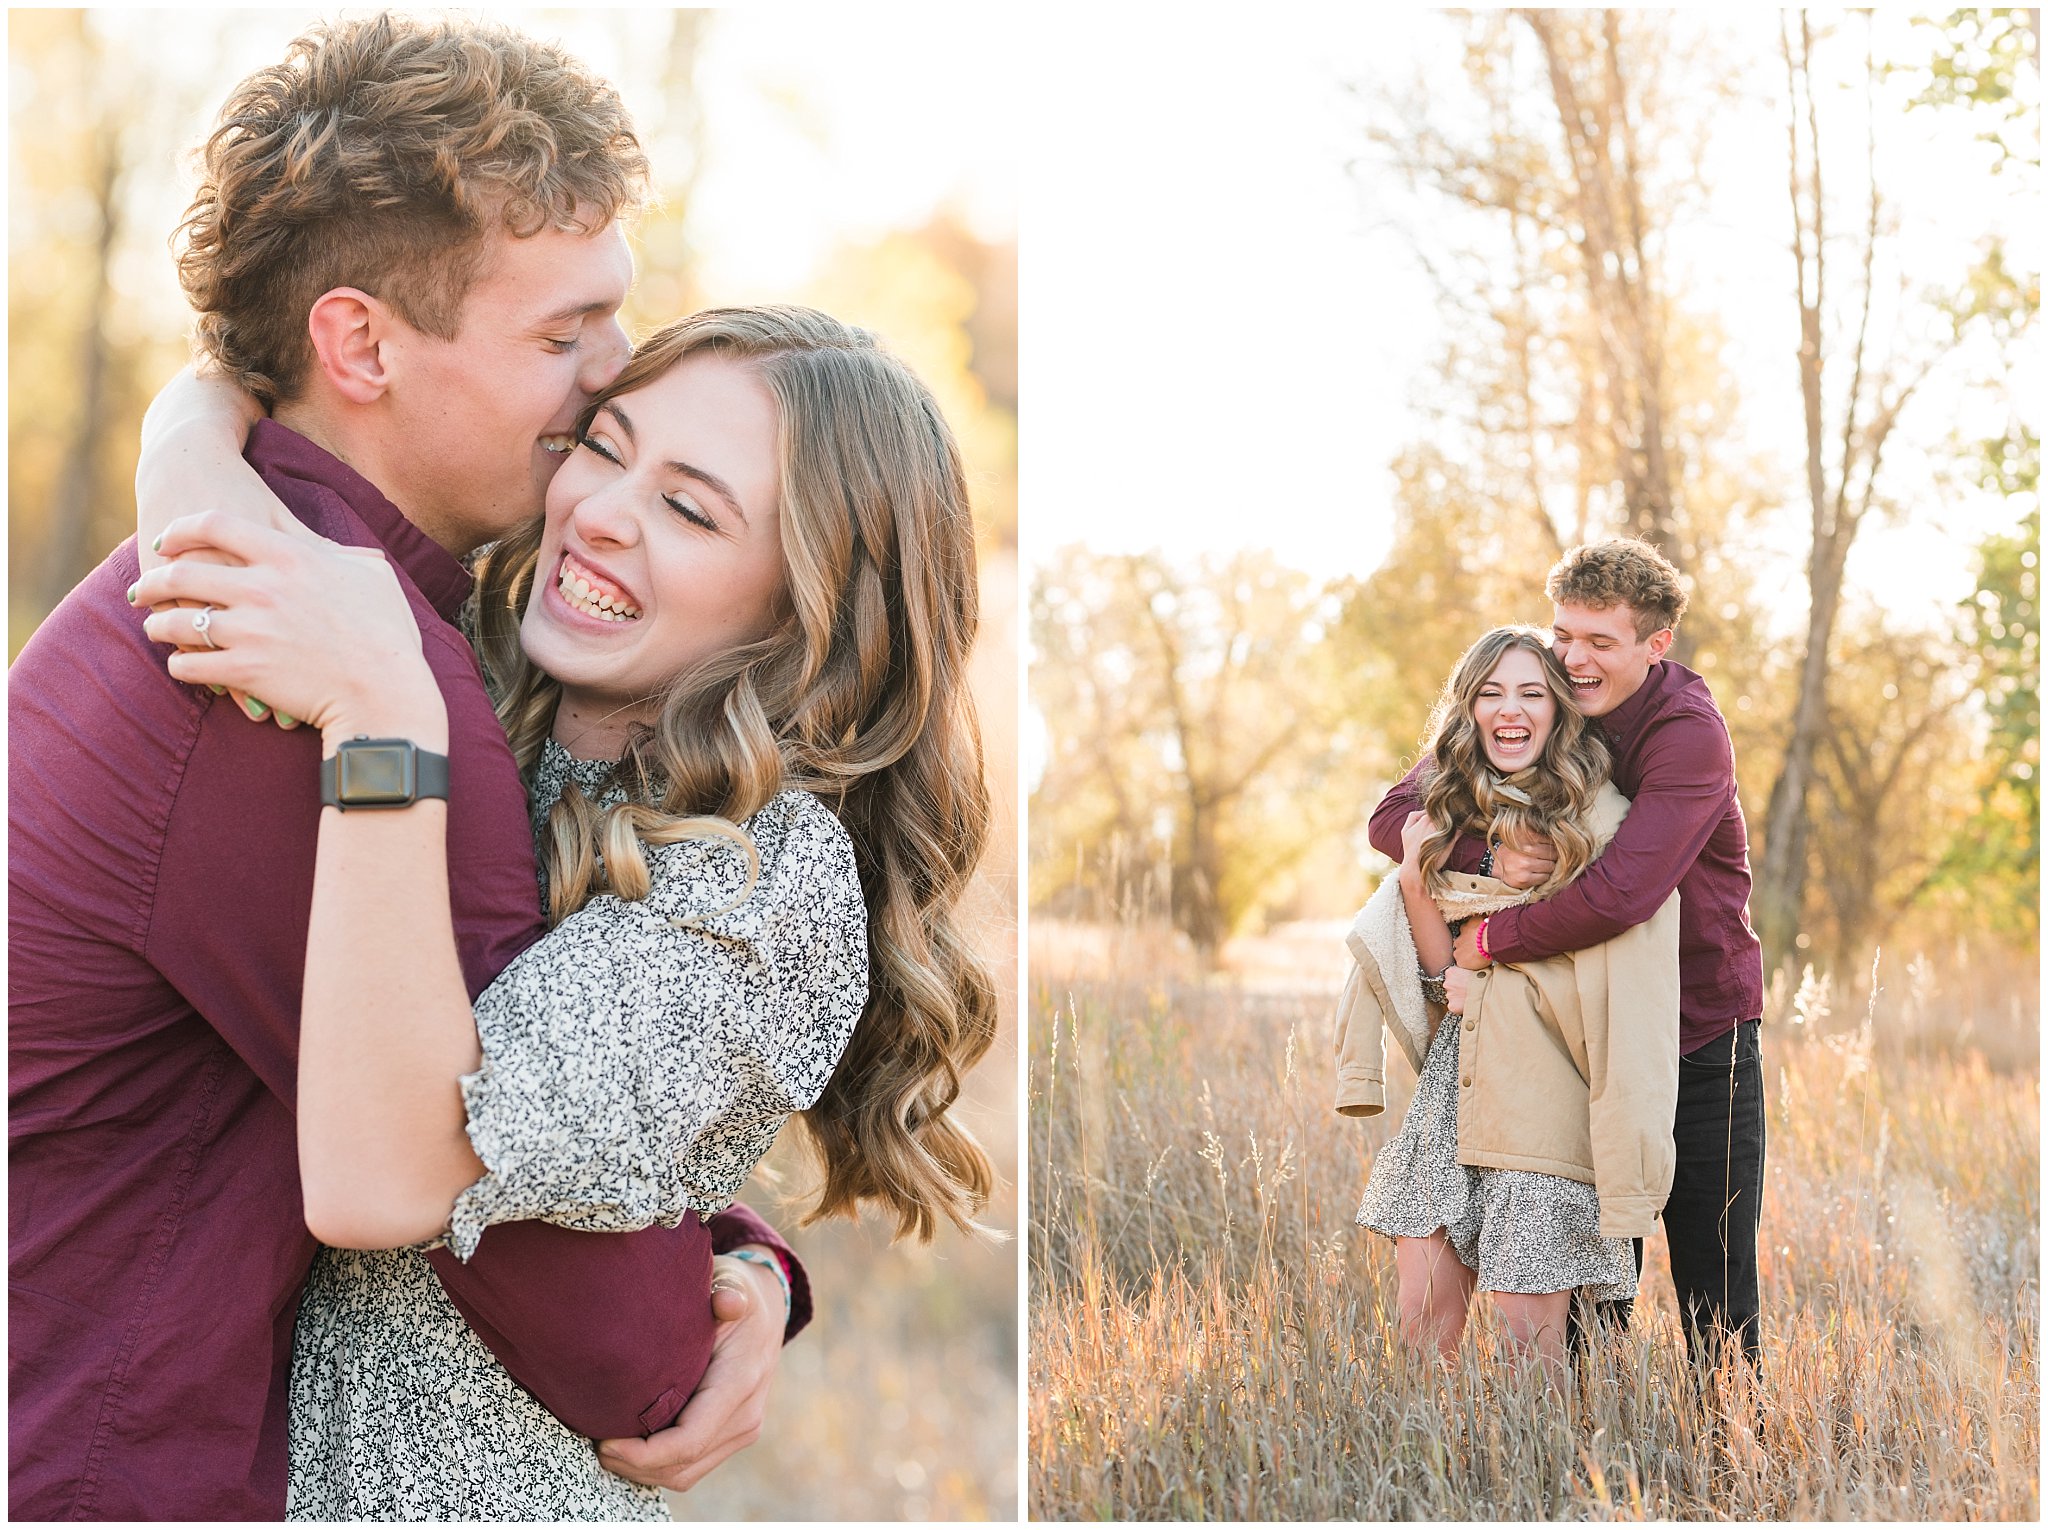 Candid photos of couple in formal outfit | Utah Fall Engagement Session in a Golden Field | Jessie and Dallin Photography